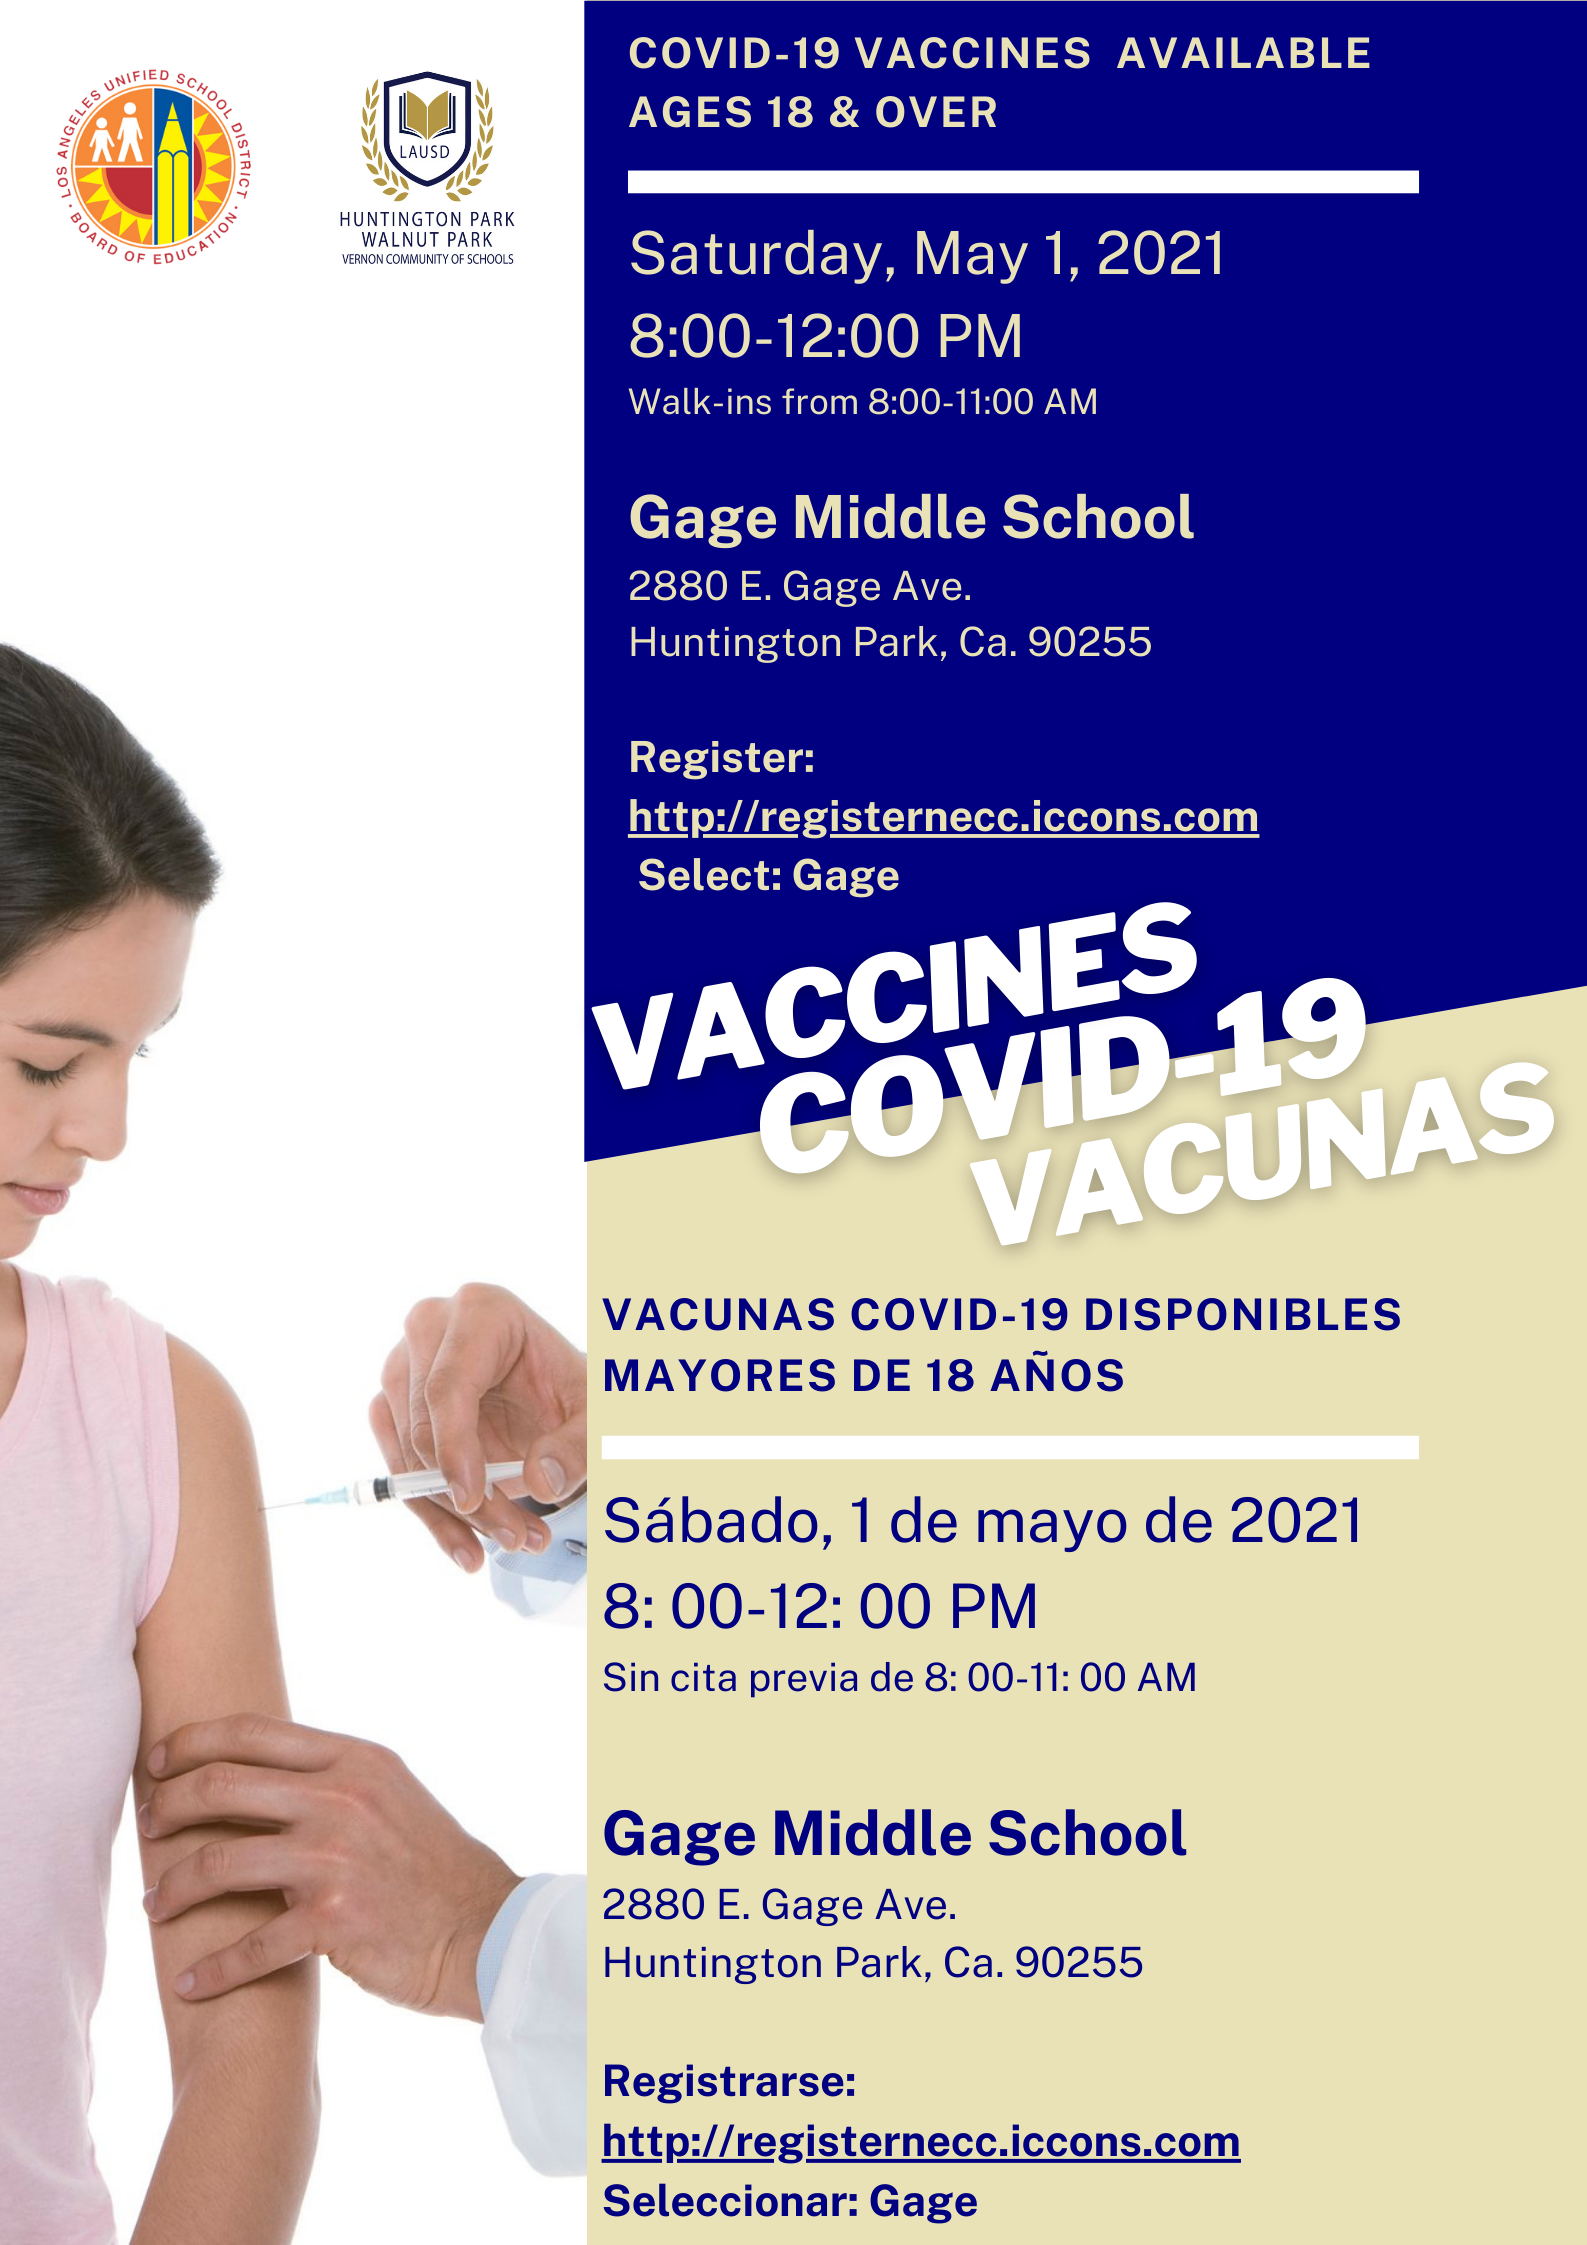 Covid 19 Vaccines at Gage Middle School May 1, 2021 from 8 am to 12 pm. 18 and older